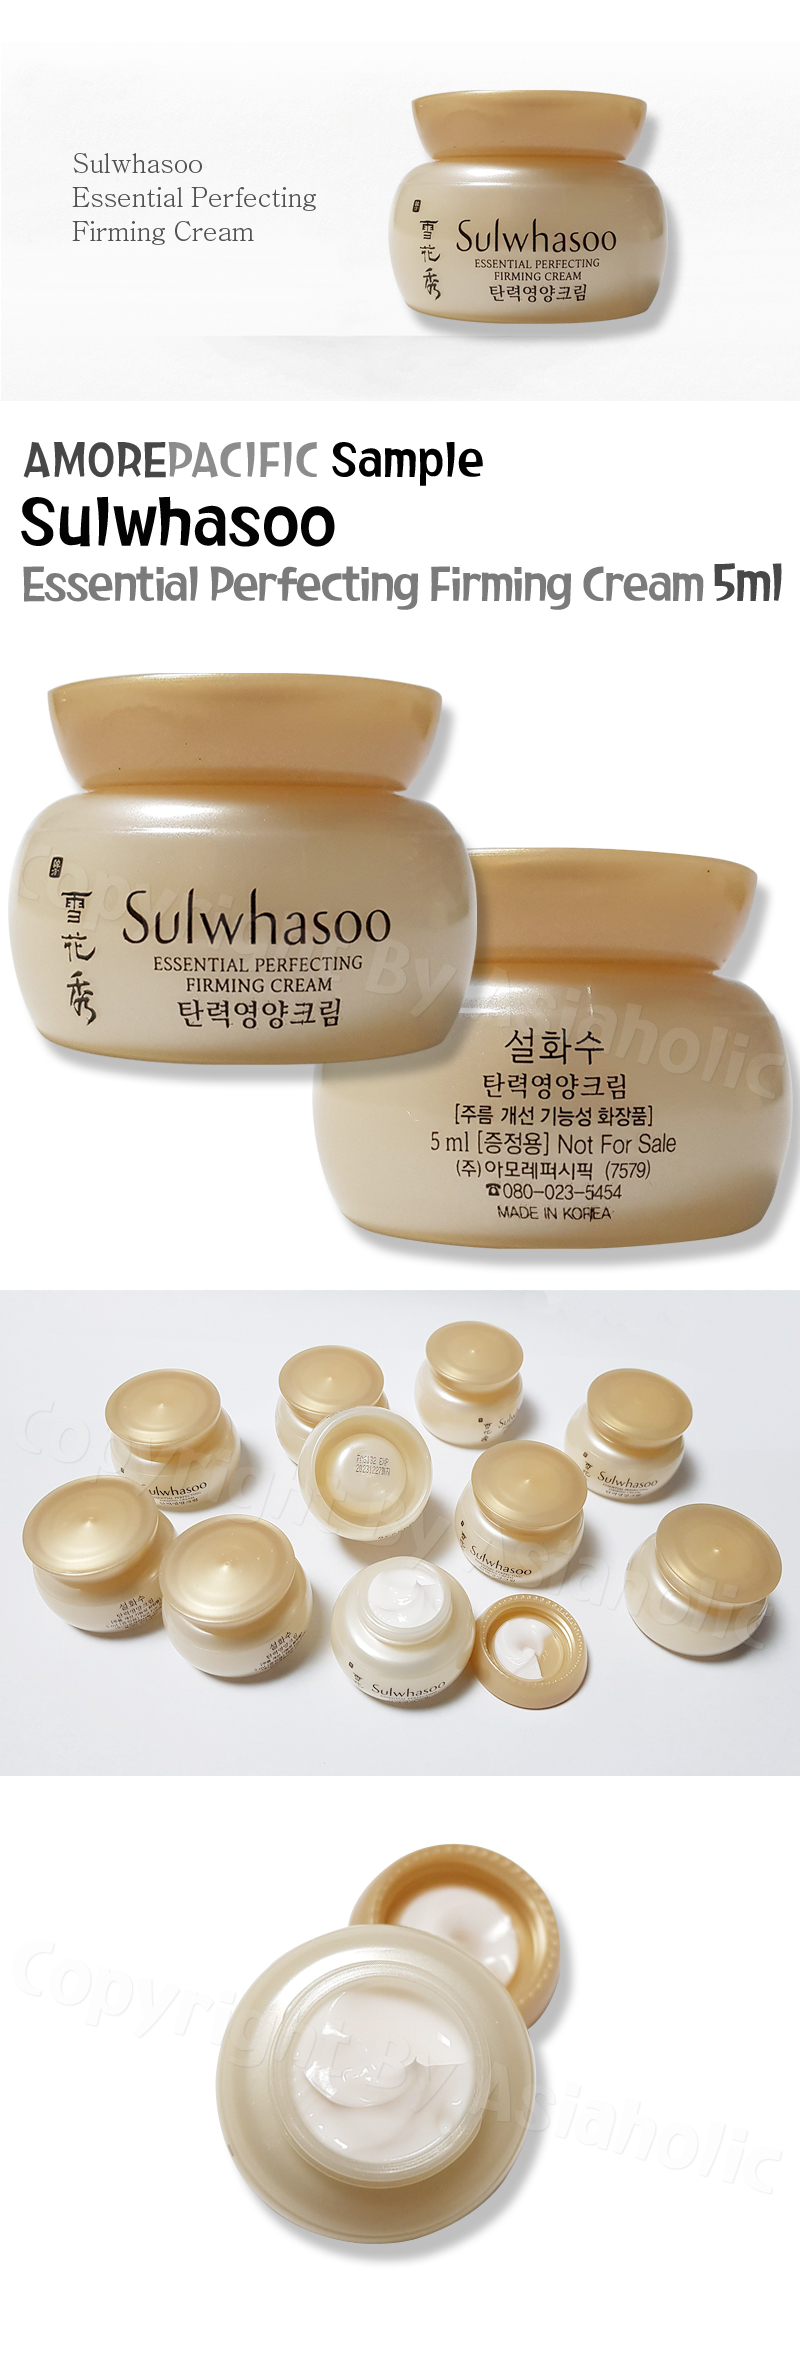 Sulwhasoo Essential Perfecting Firming Cream 5ml x 30pcs (150ml) Sample Newest Version